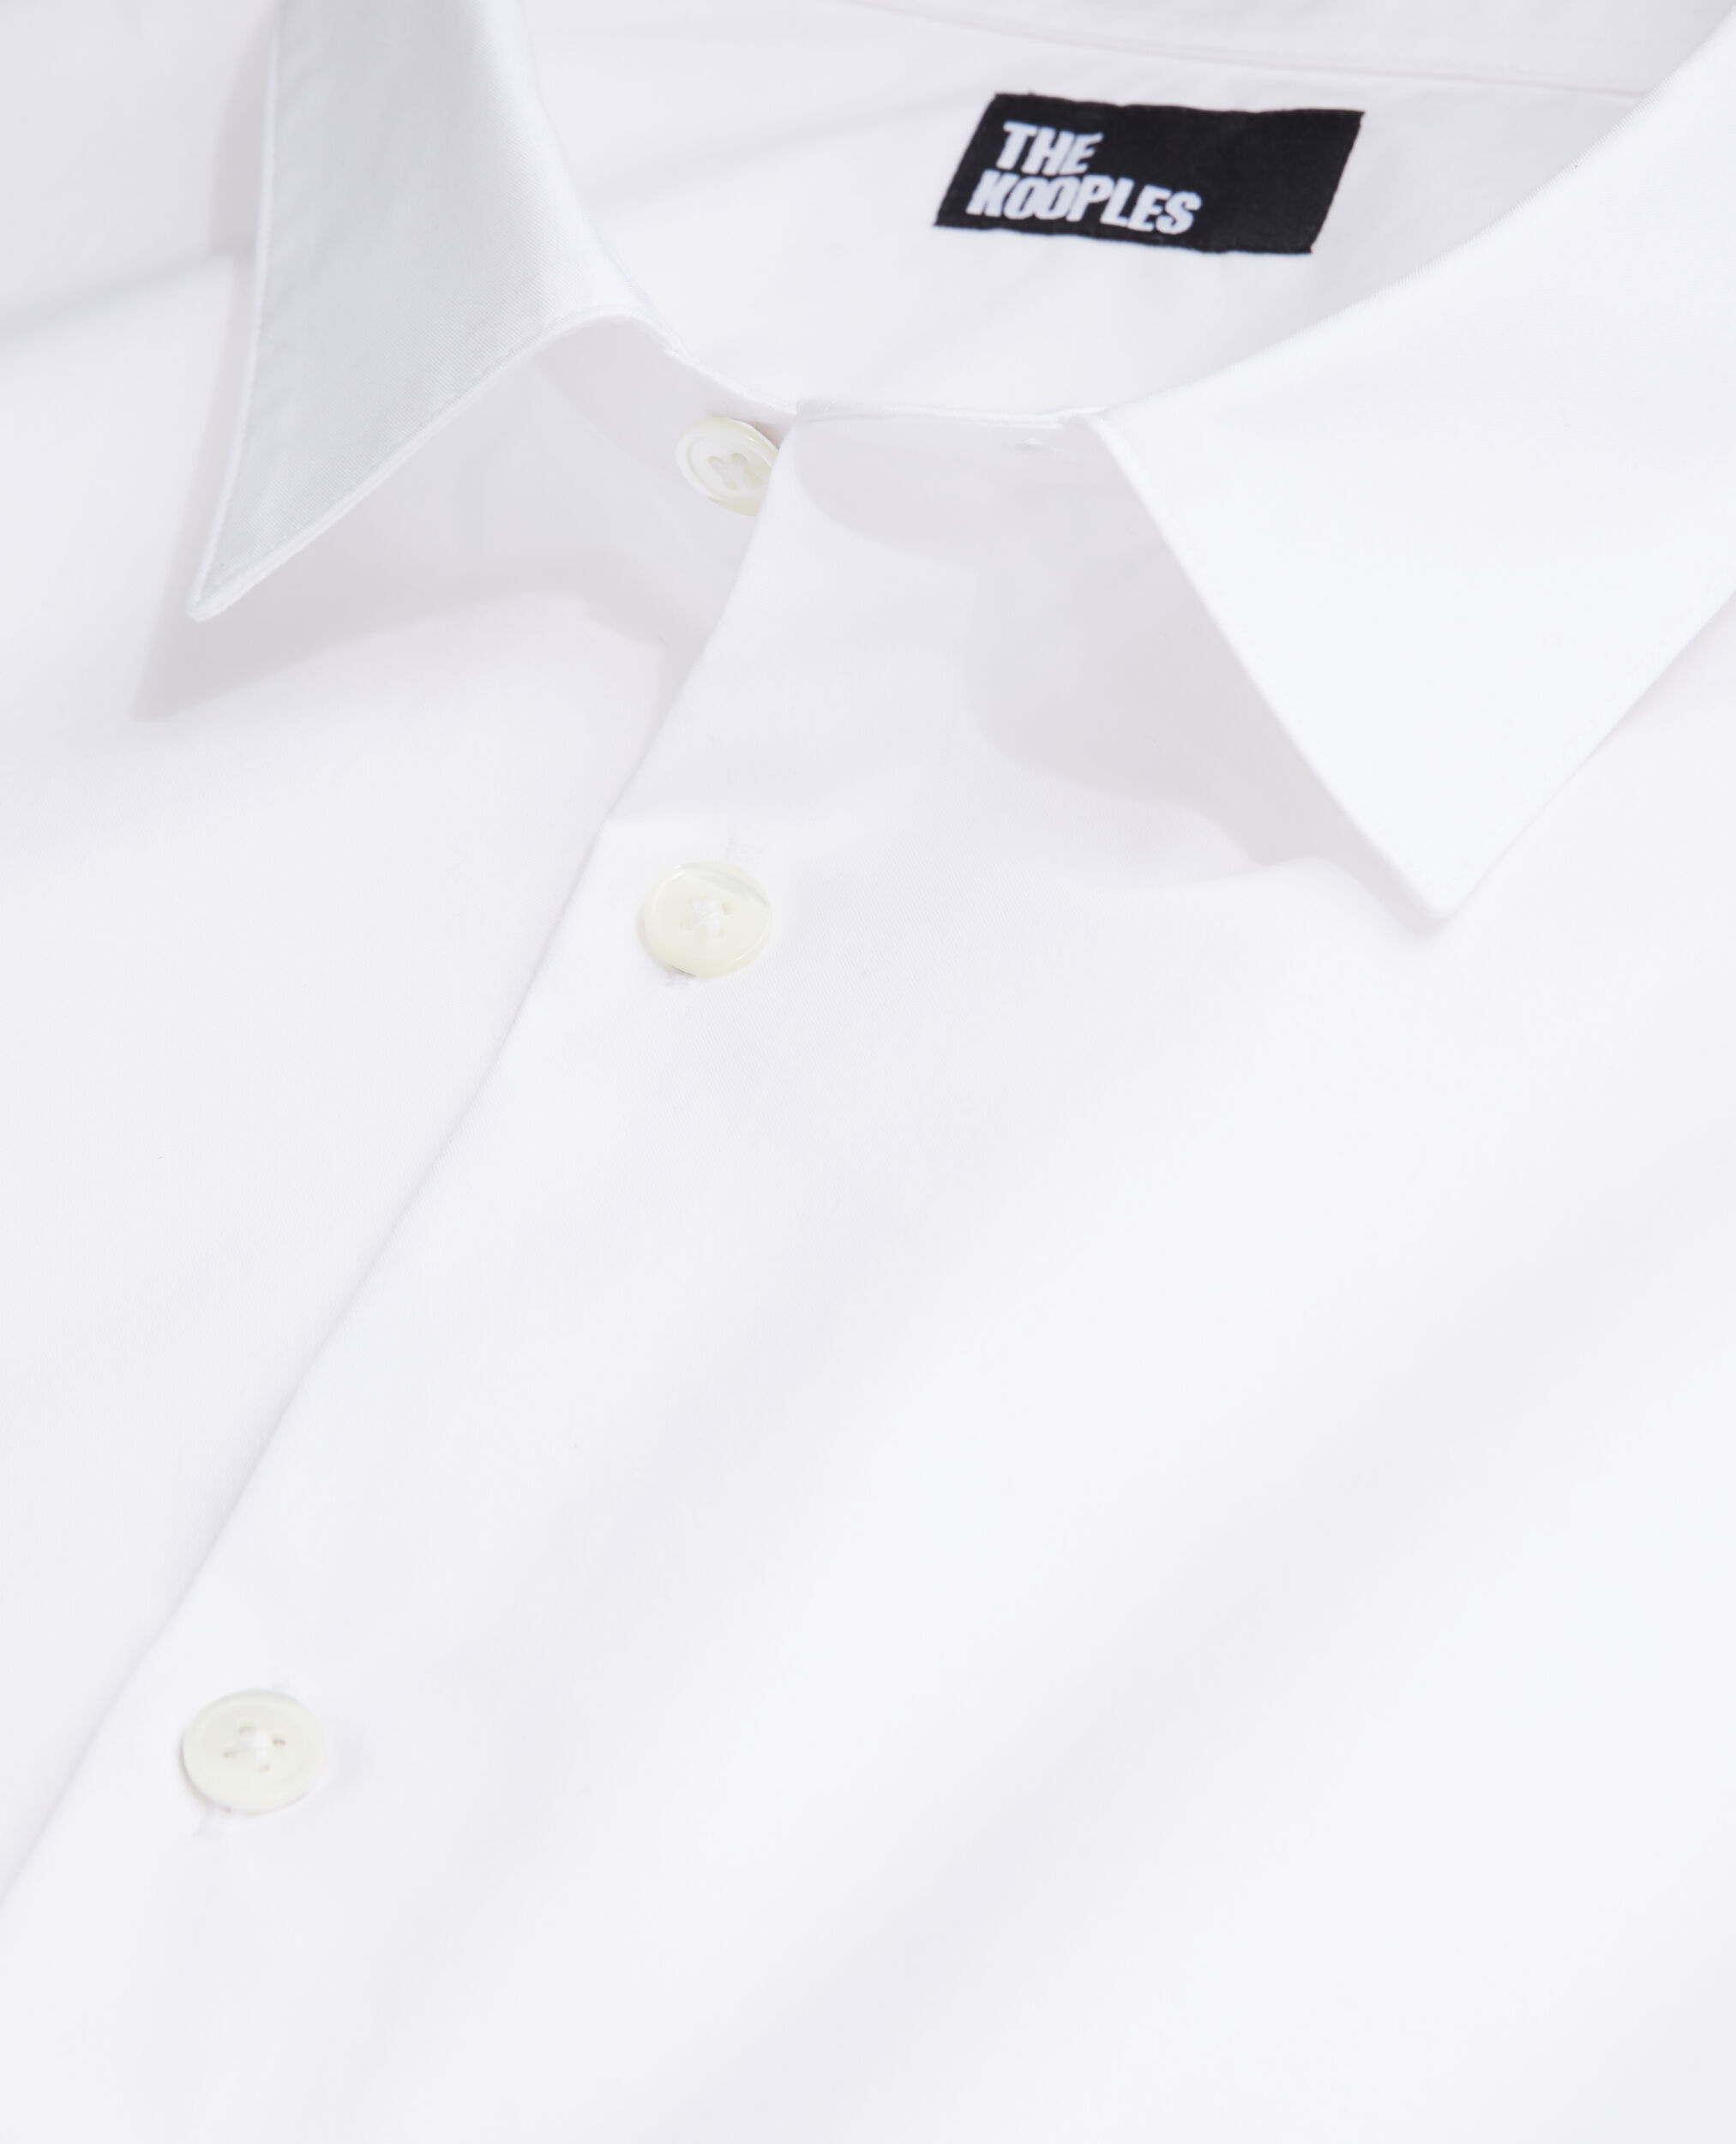 Chemise formelle blanche, WHITE, hi-res image number null